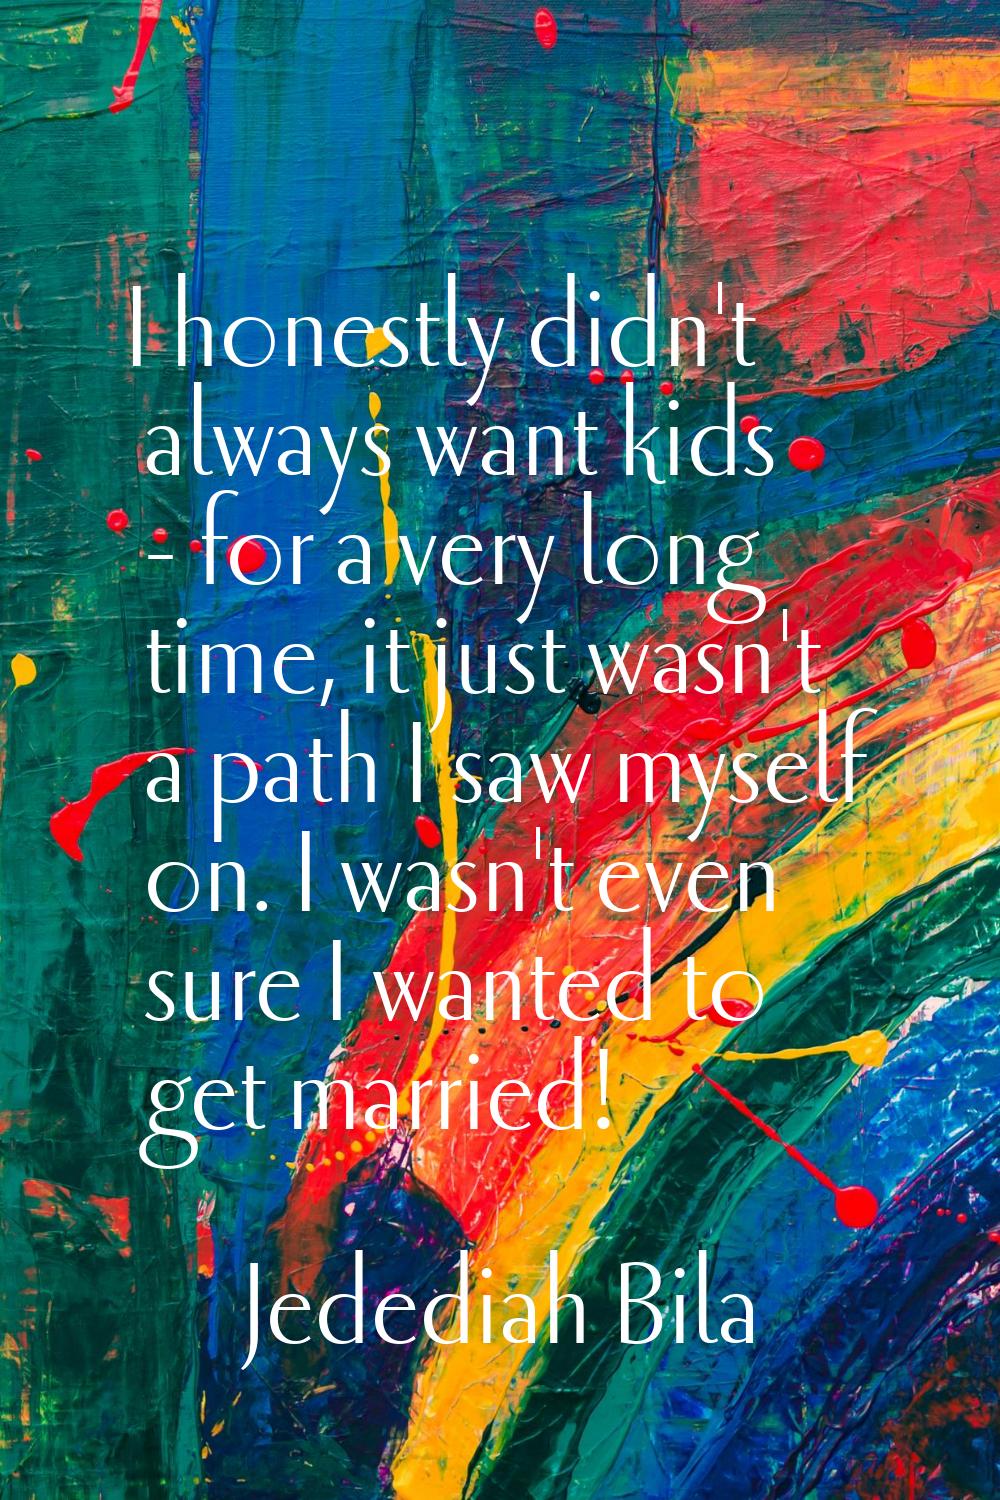 I honestly didn't always want kids - for a very long time, it just wasn't a path I saw myself on. I